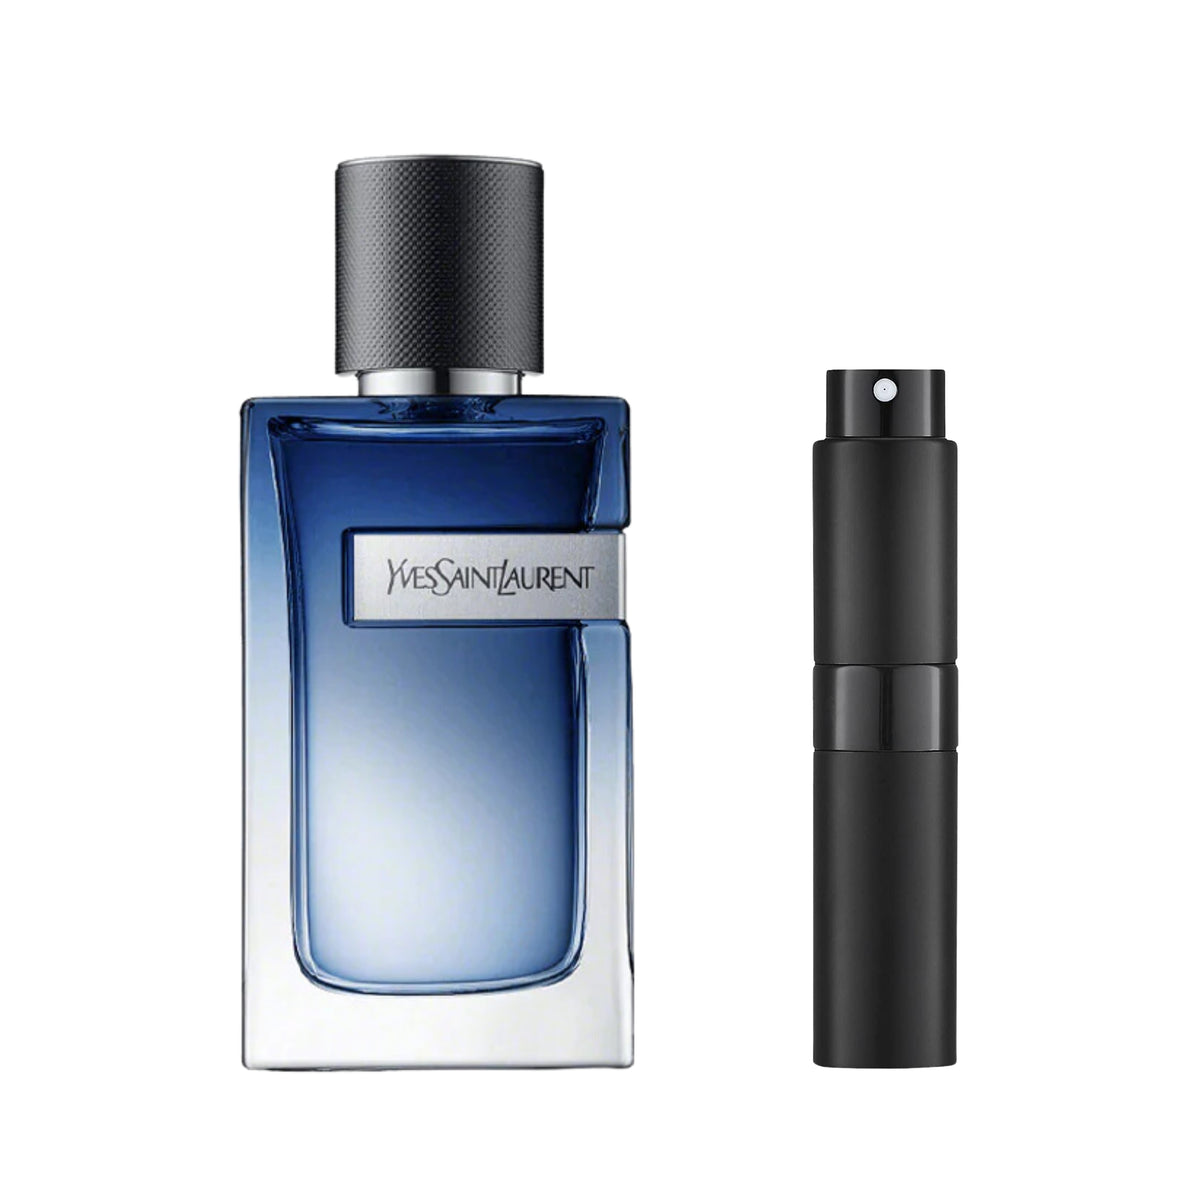 YSL Y Live EDT